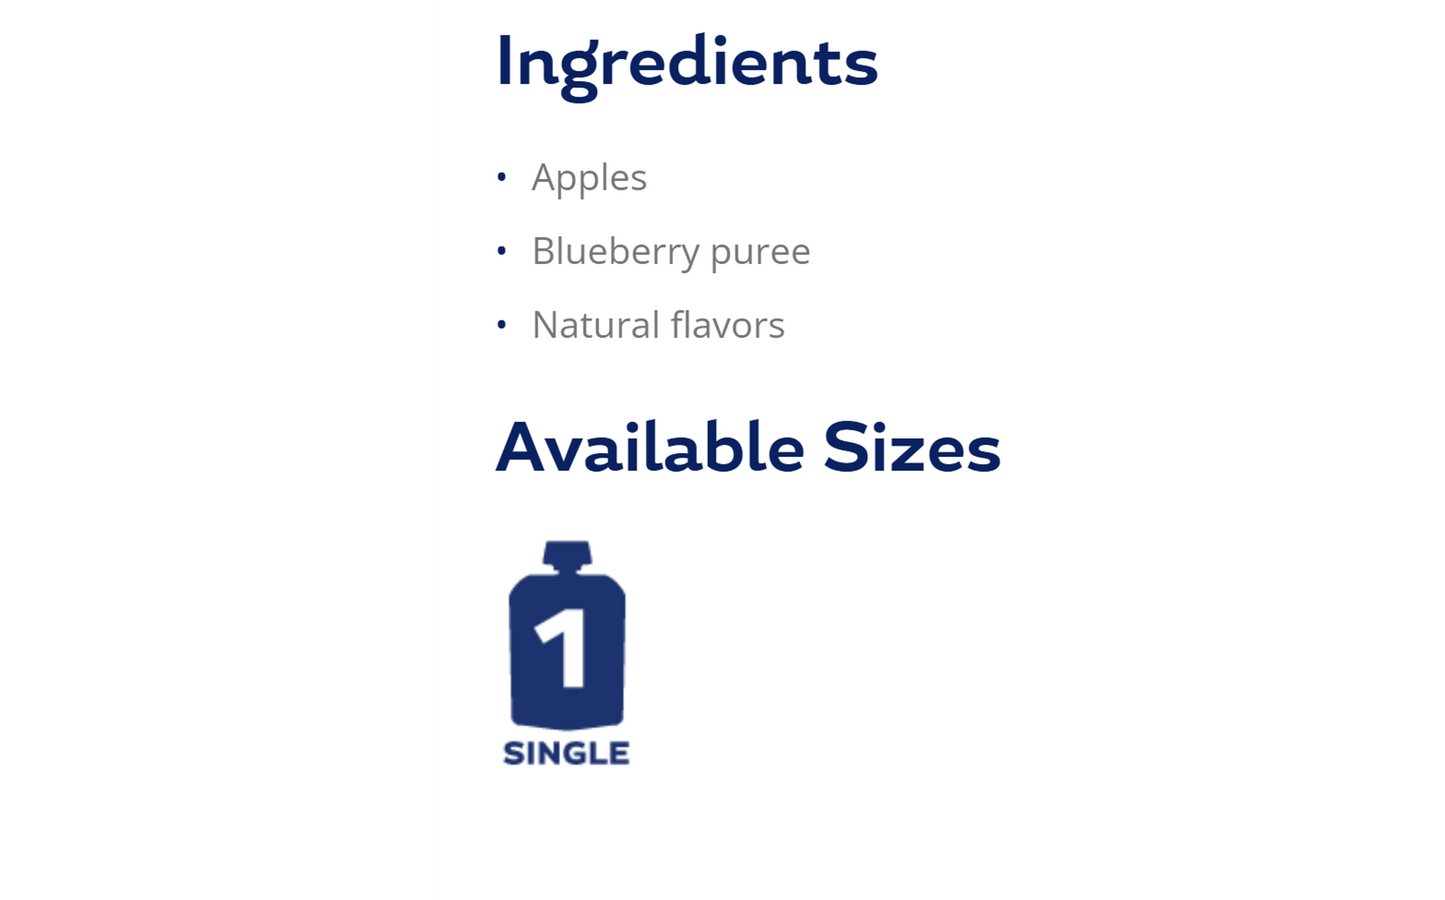 Simple ingredients and available sizes of Buddy Fruits Blueberry & Apple fruit pouch.